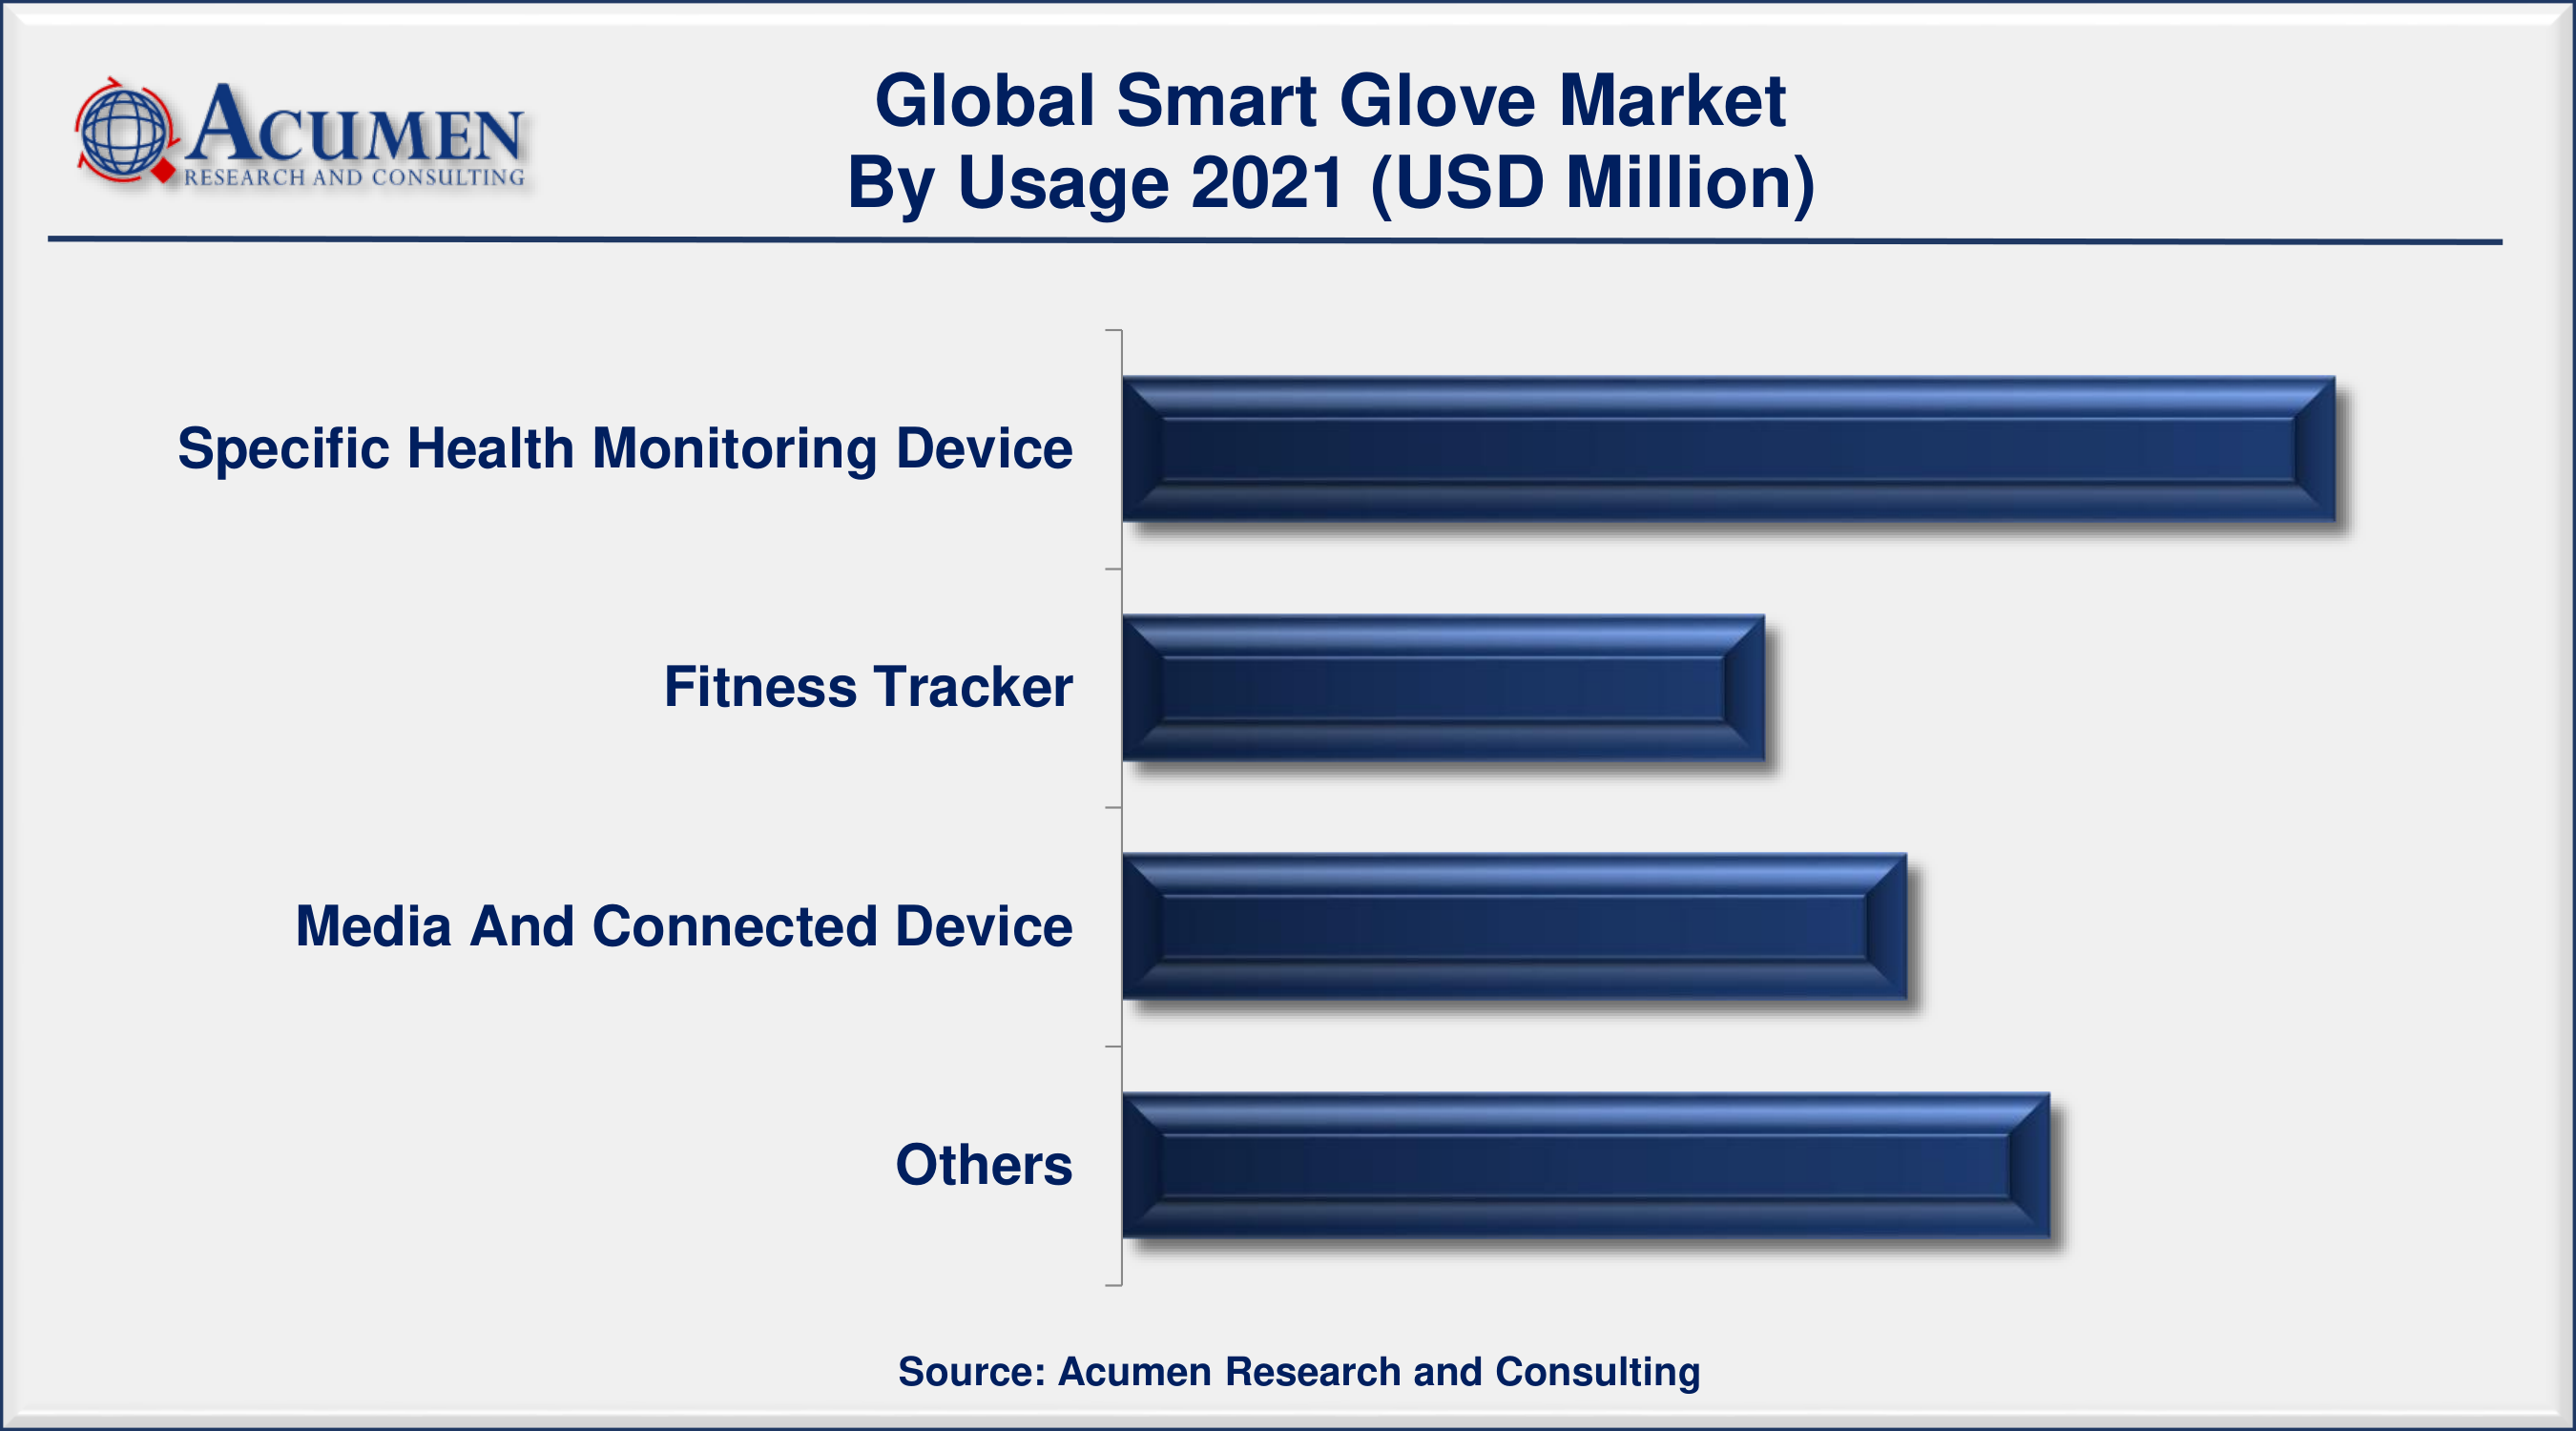 Smart Glove Market Size was valued at USD 2,289 Million in 2021 and is predicted to be worth USD 4,983 Million by 2030, with a CAGR of 9.3% from 2022 to 2030.